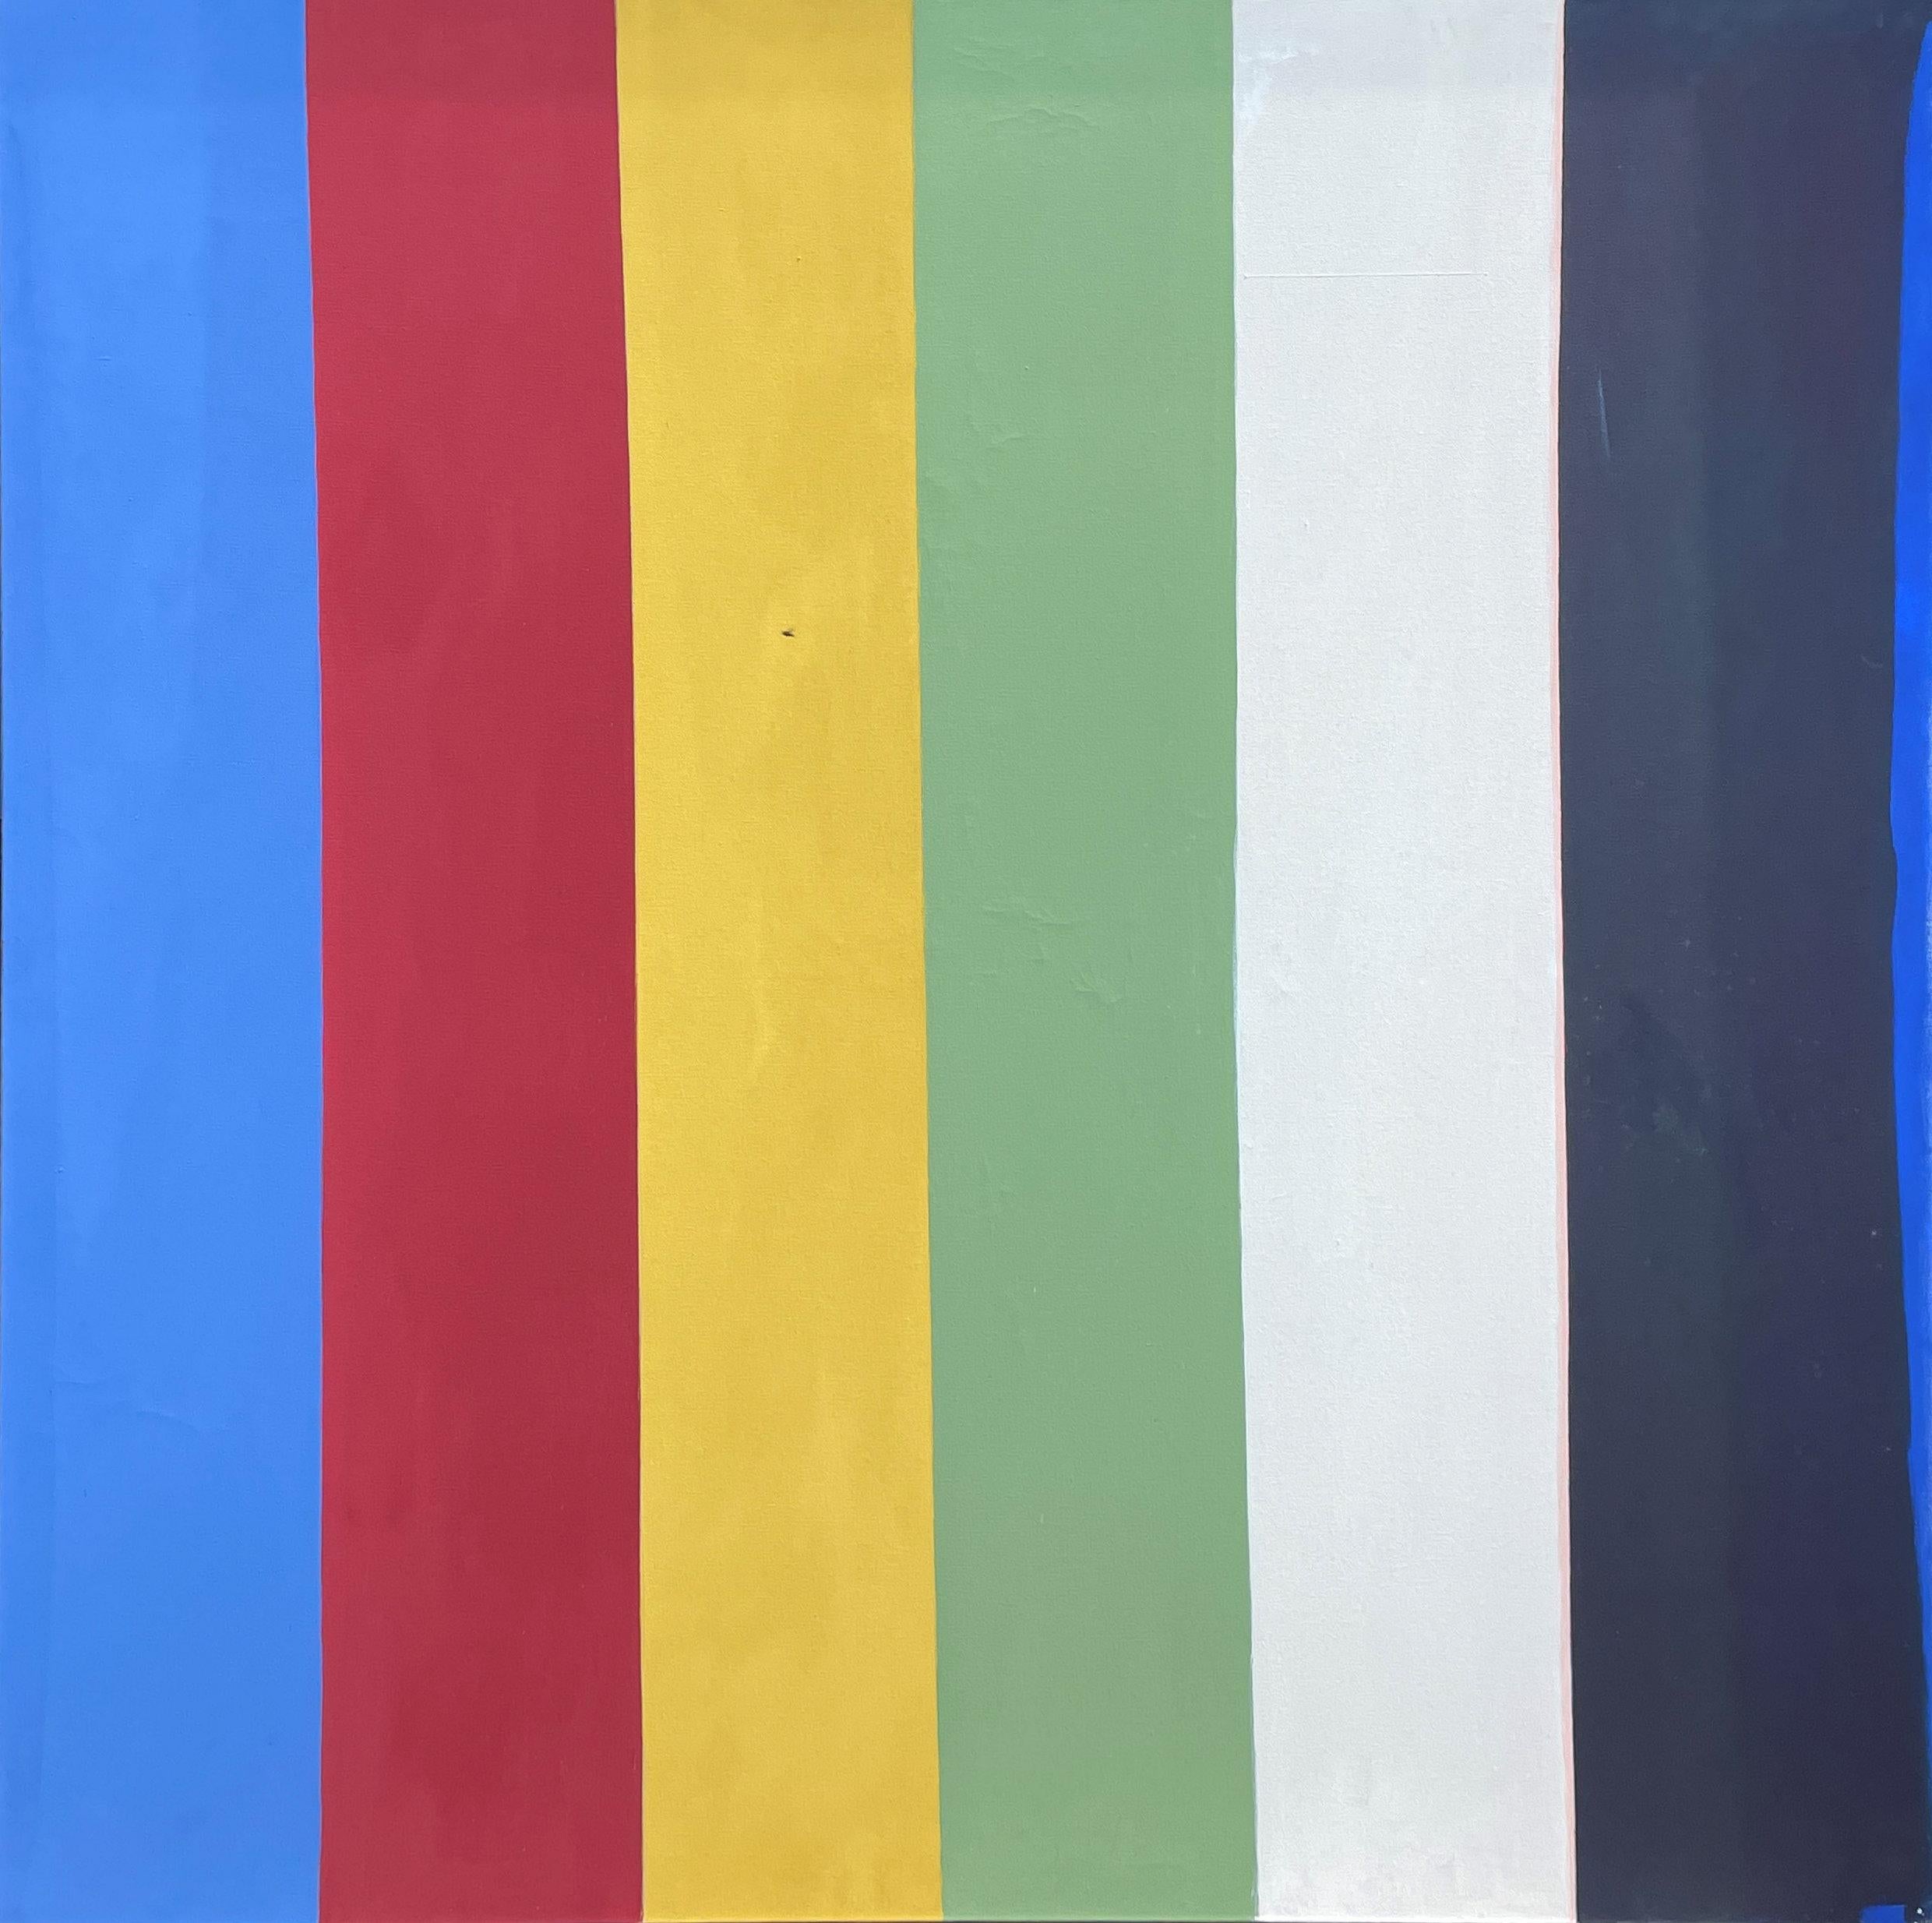 Calvert Coggeshall
Illumination, 1973
Signed, titled, and dated on the reverse
Acrylic on canvas
65 x 67 inches

Calvert Coggeshall worked as an abstract painter and interior designer primarily in Maine and New York City. From 1951 to 1978, he